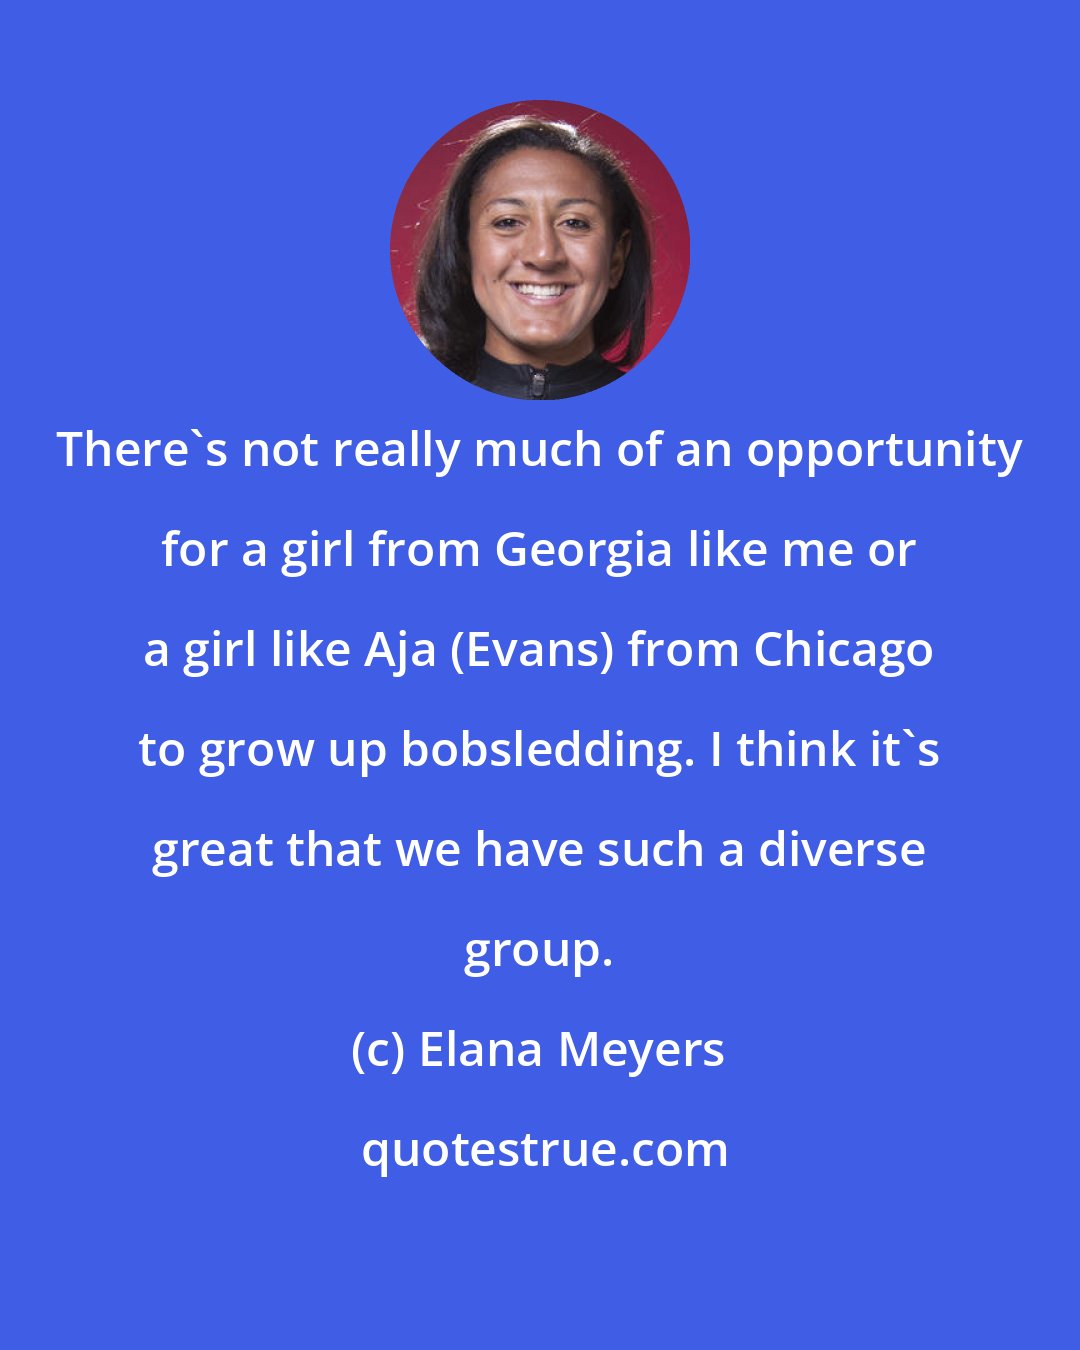 Elana Meyers: There's not really much of an opportunity for a girl from Georgia like me or a girl like Aja (Evans) from Chicago to grow up bobsledding. I think it's great that we have such a diverse group.